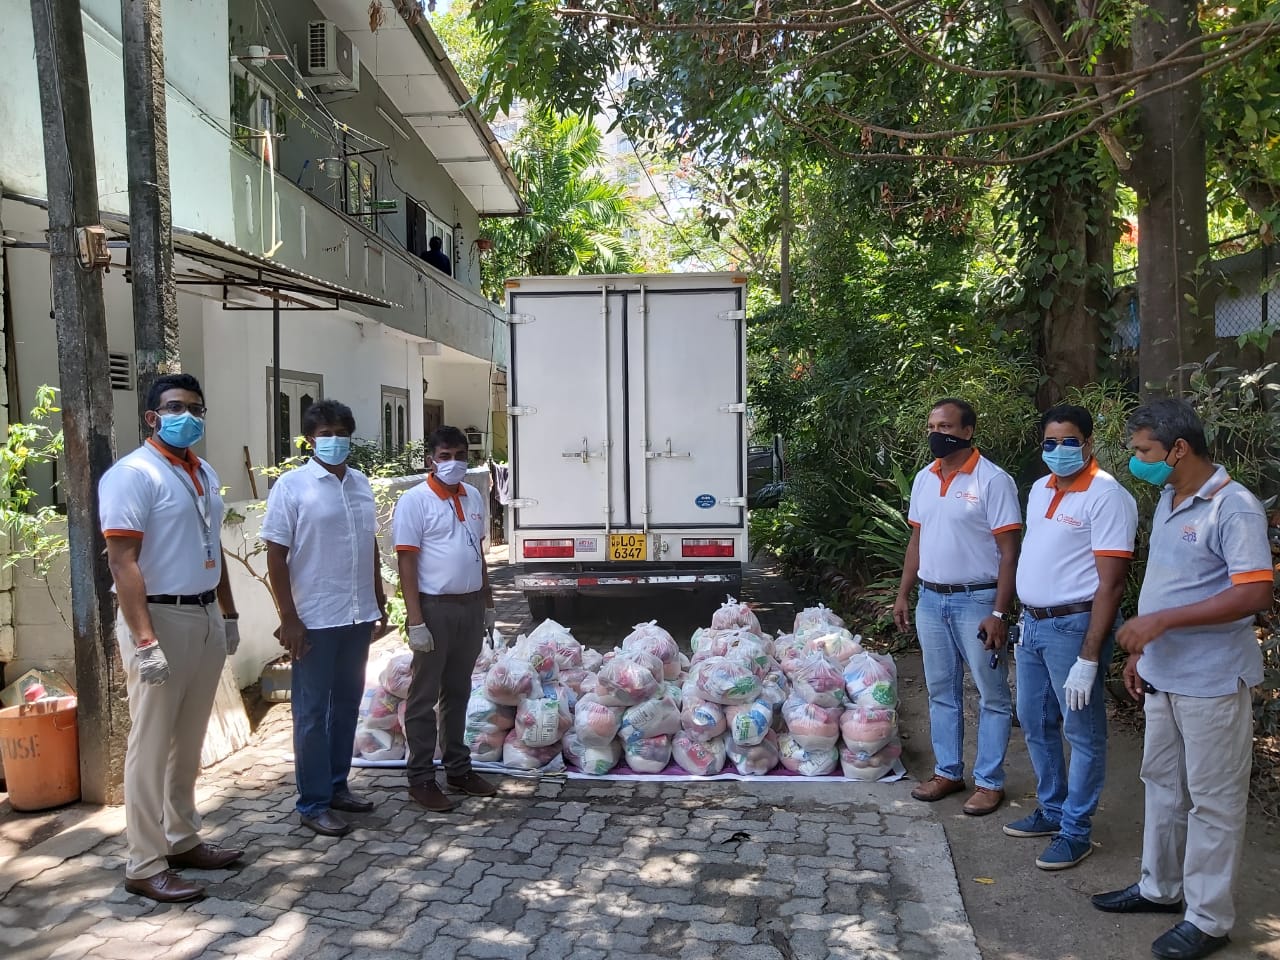 A-PAD partners with Union Assurance in Distributing Ration Packs to Those in Need